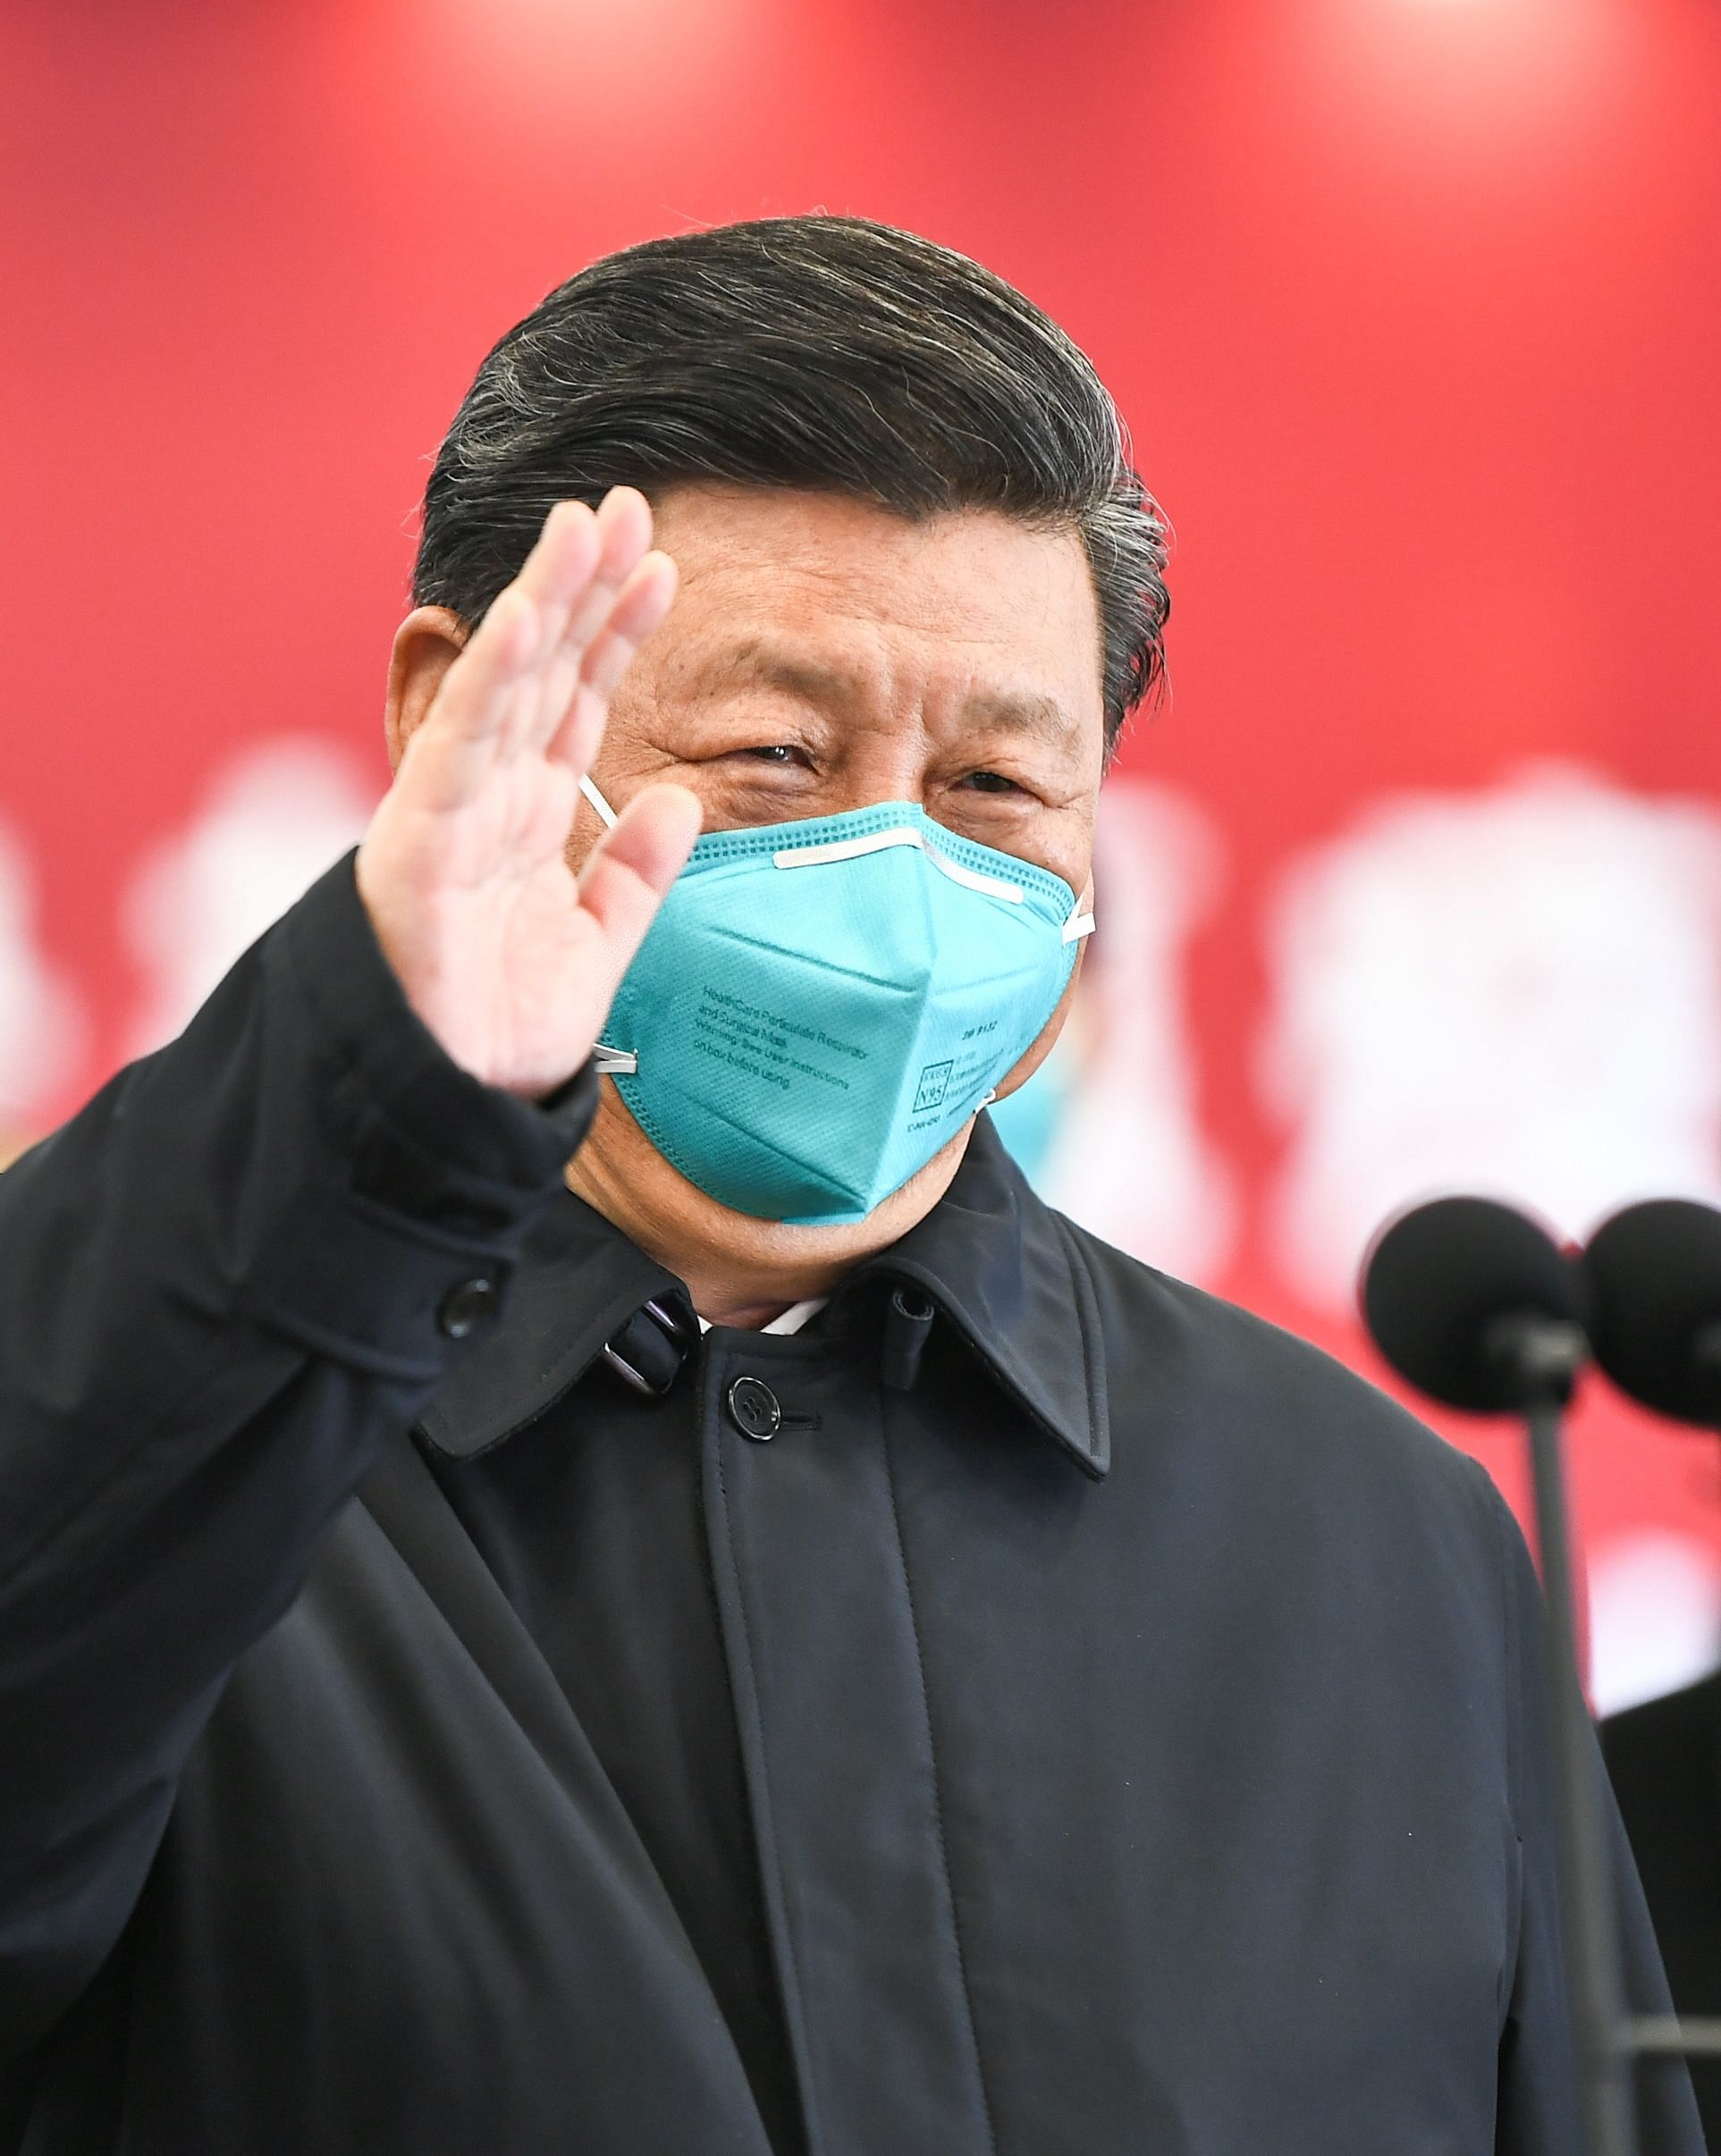 That status might have provided him with some immunity from prosecution, although he appears to have crossed a line by criticizing Xi's personal leadership, whether by name or implication. (Credit: AP Photo)